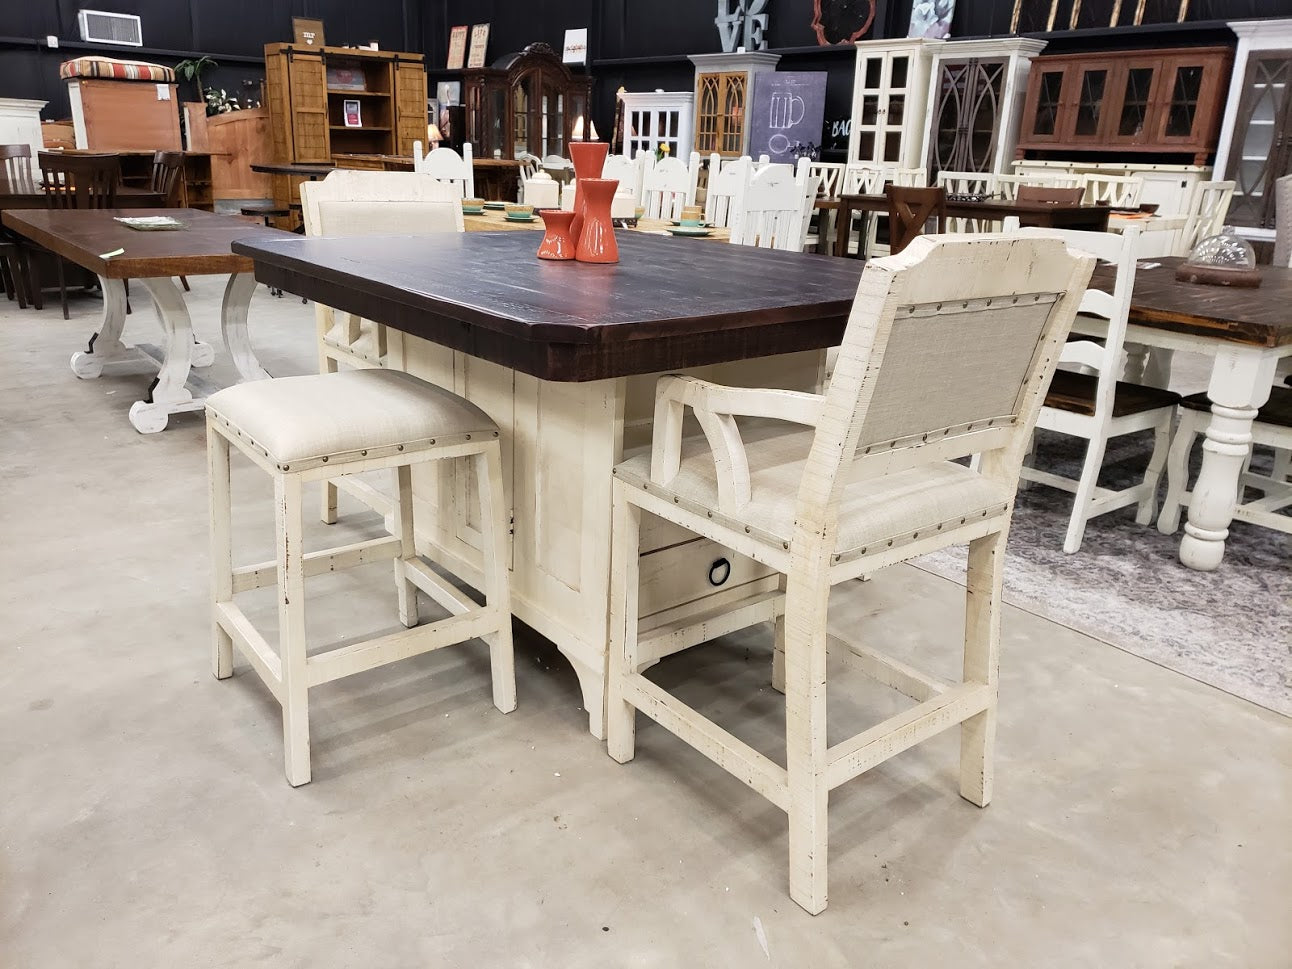 LN-KIS-691 FI Island Dining Table w/ 2 Backless Barstools and 2 Armed Barstools